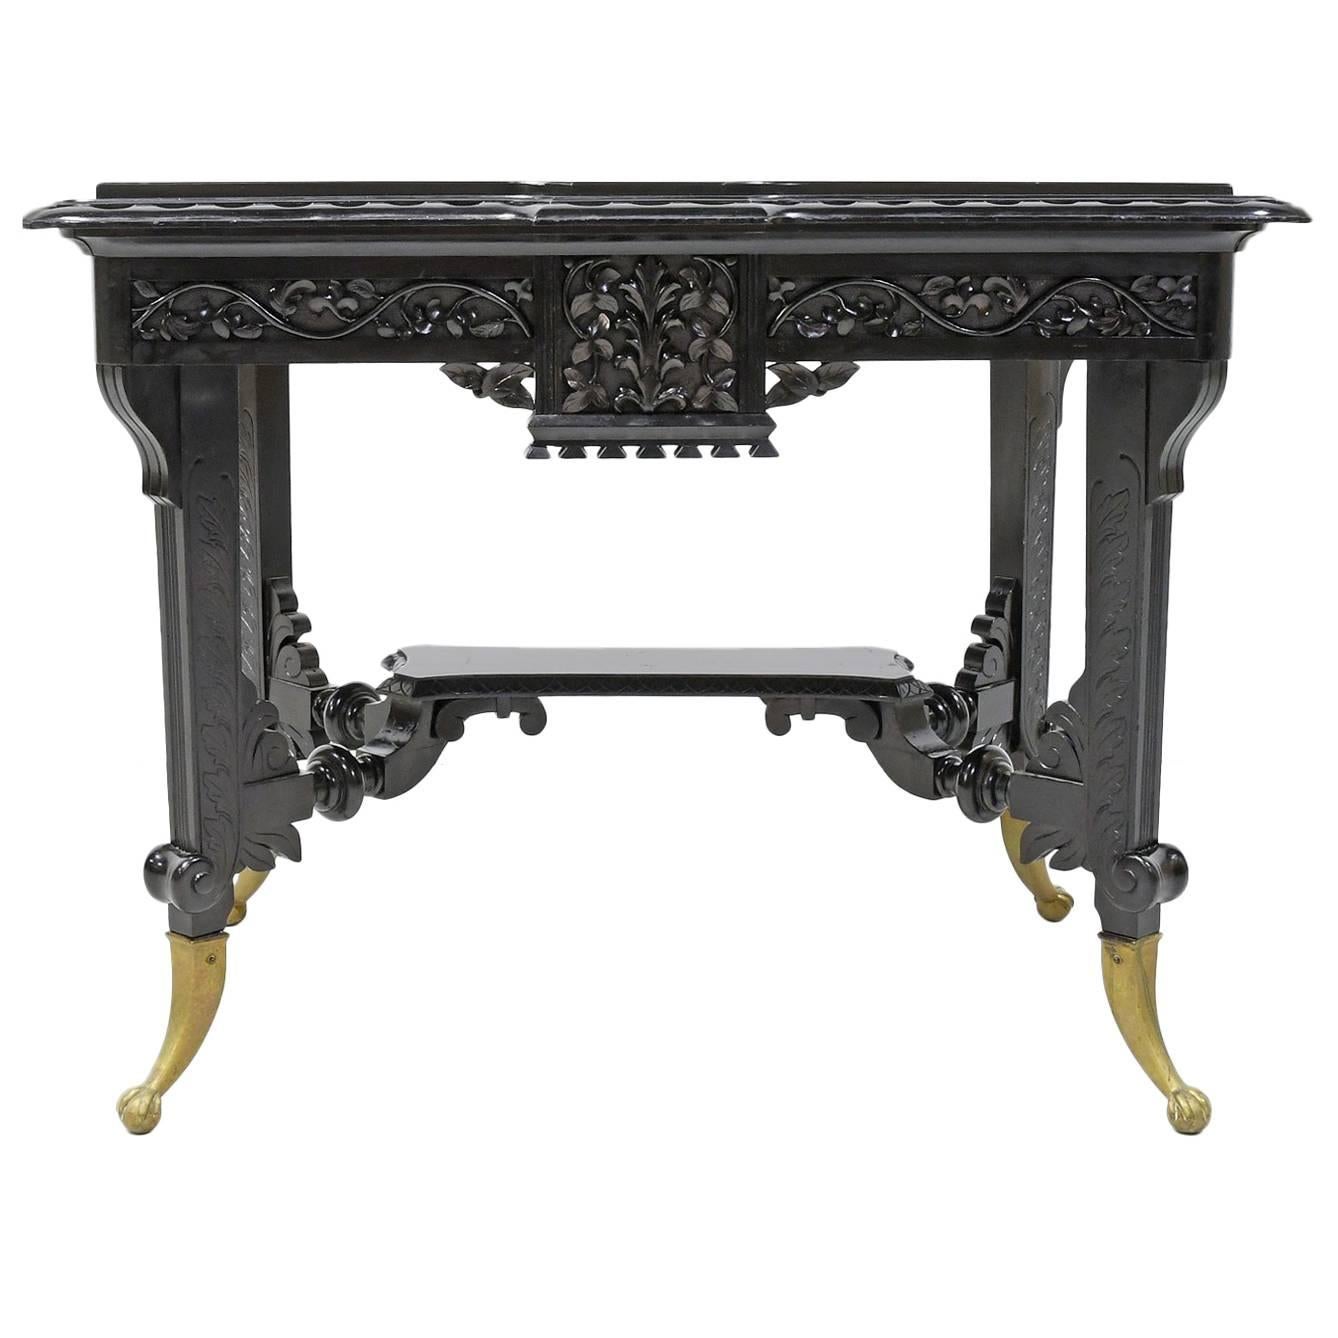 Aesthetic Movement Centre Table in Carved Ebonized Wood with Brass Feet, c. 1870